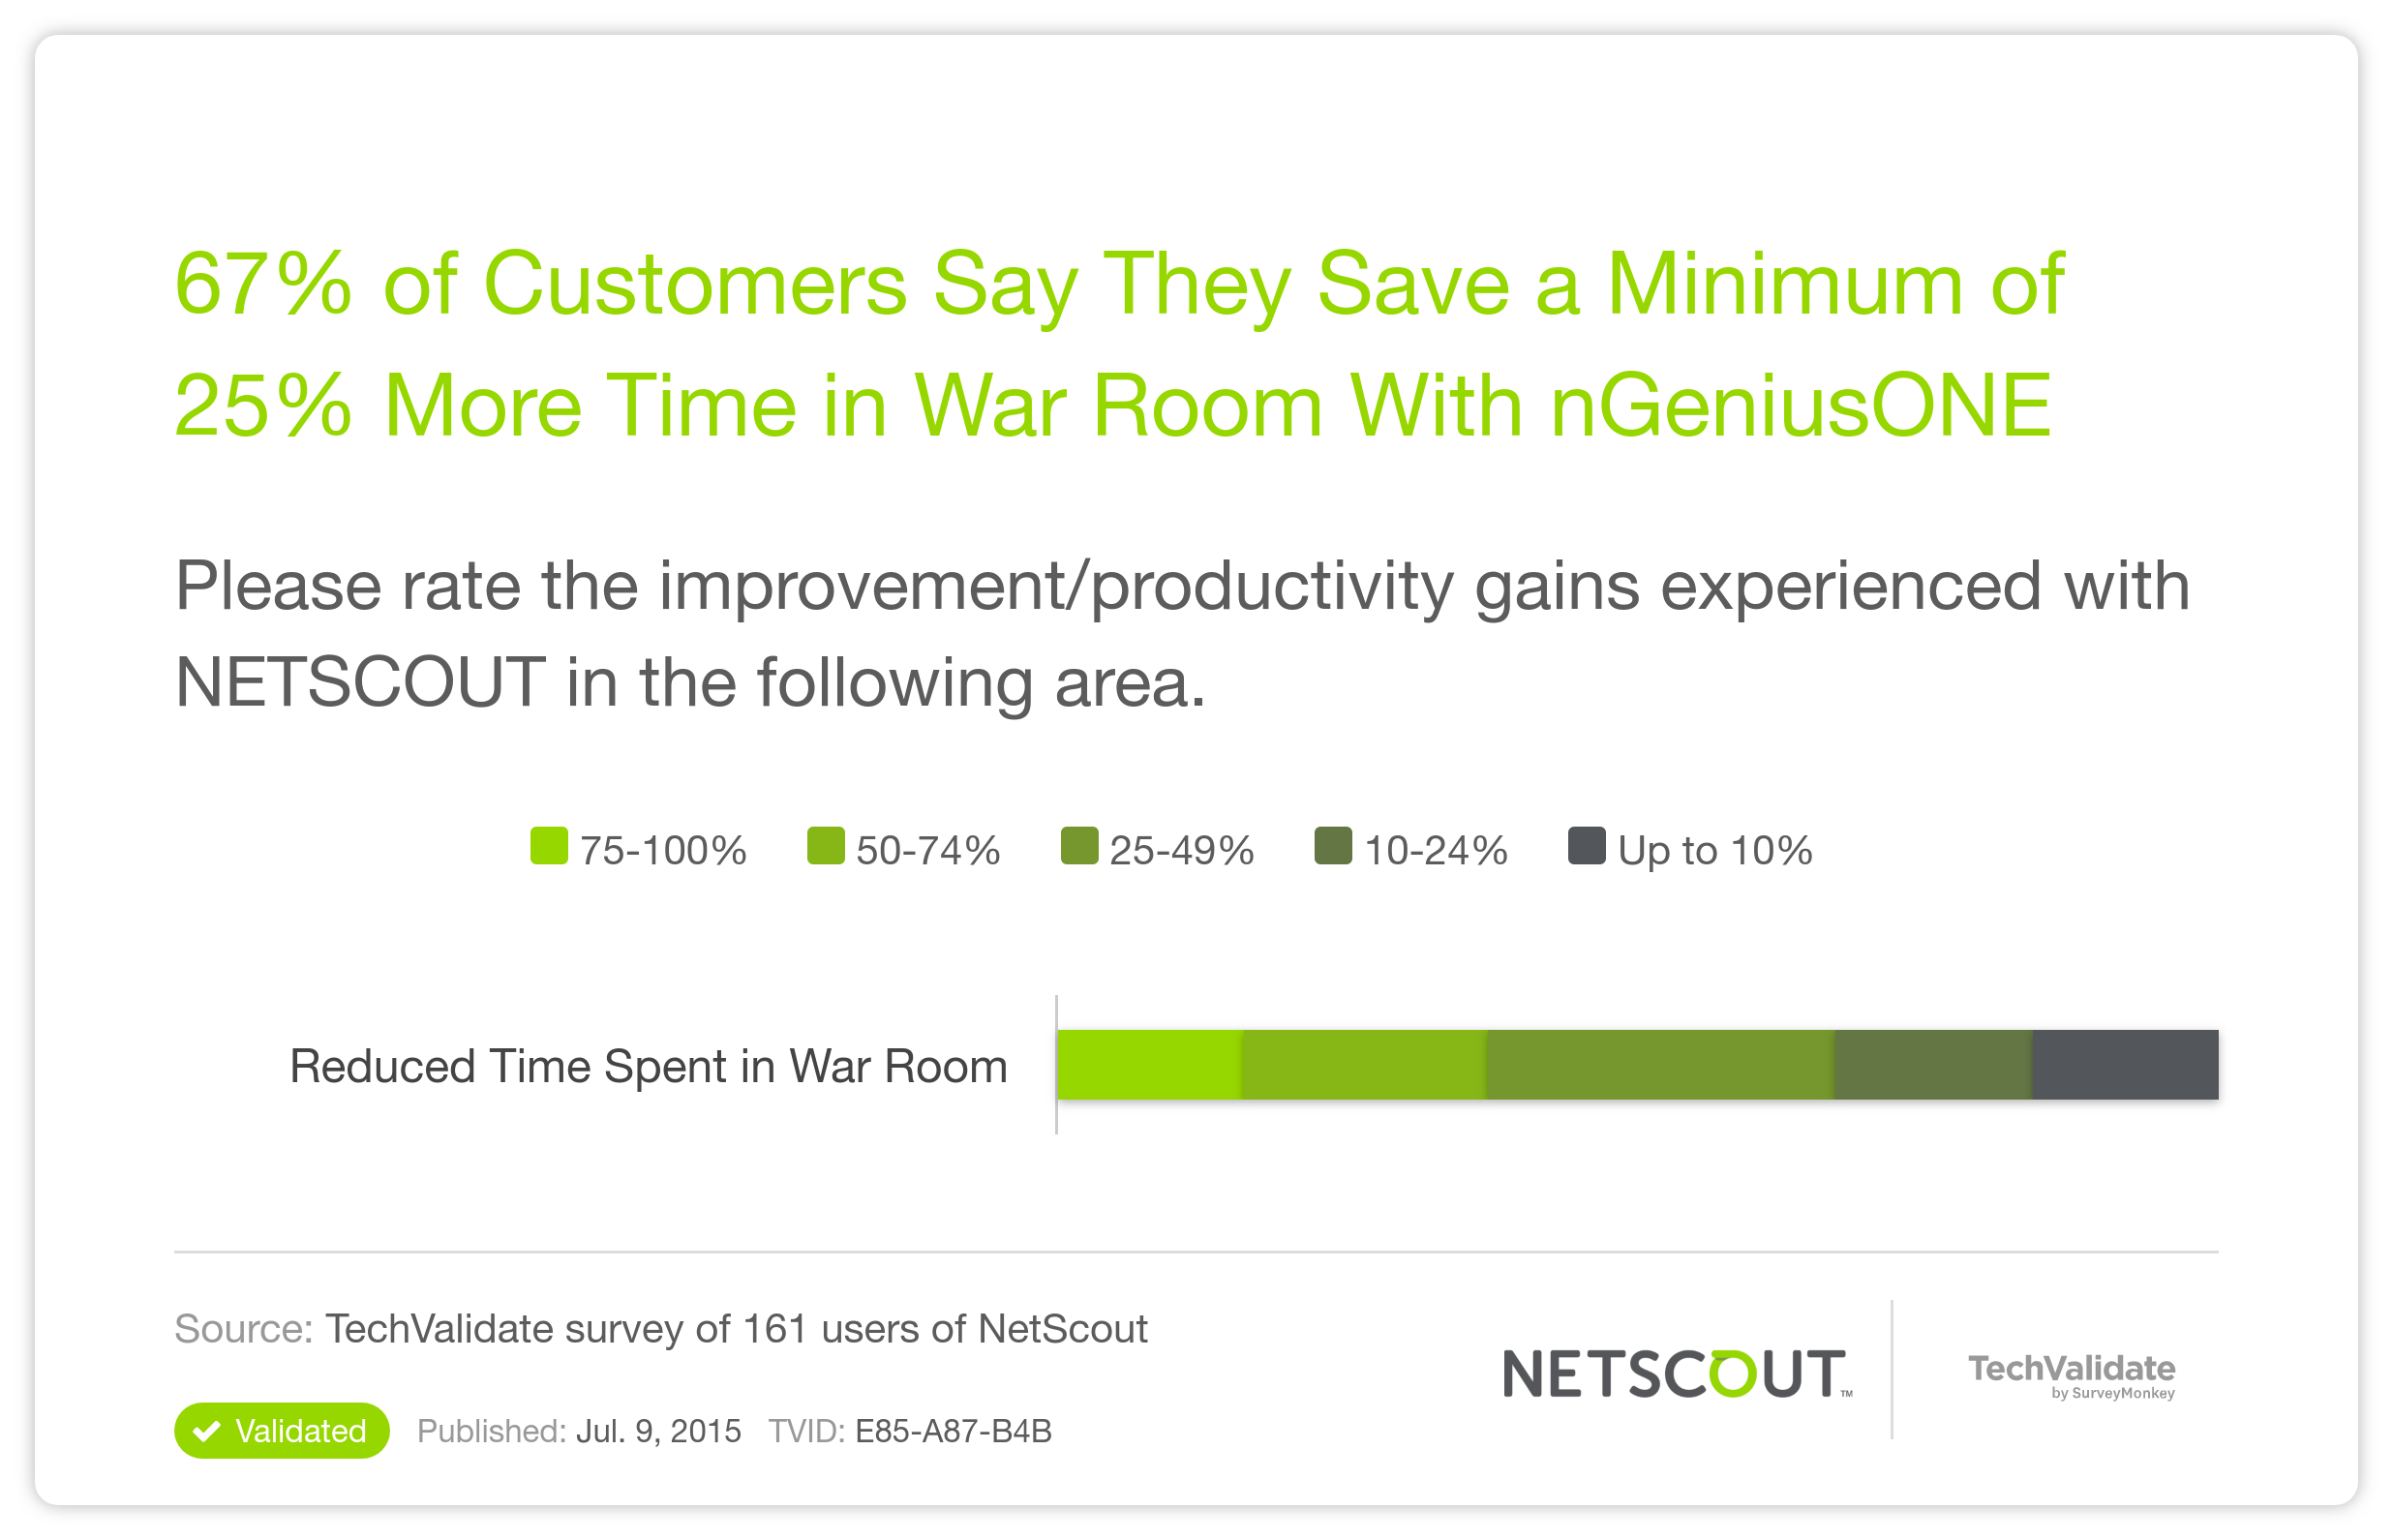 67% of Customers Say They Save a Minimum of 25% More Time in War Room With nGeniusONE